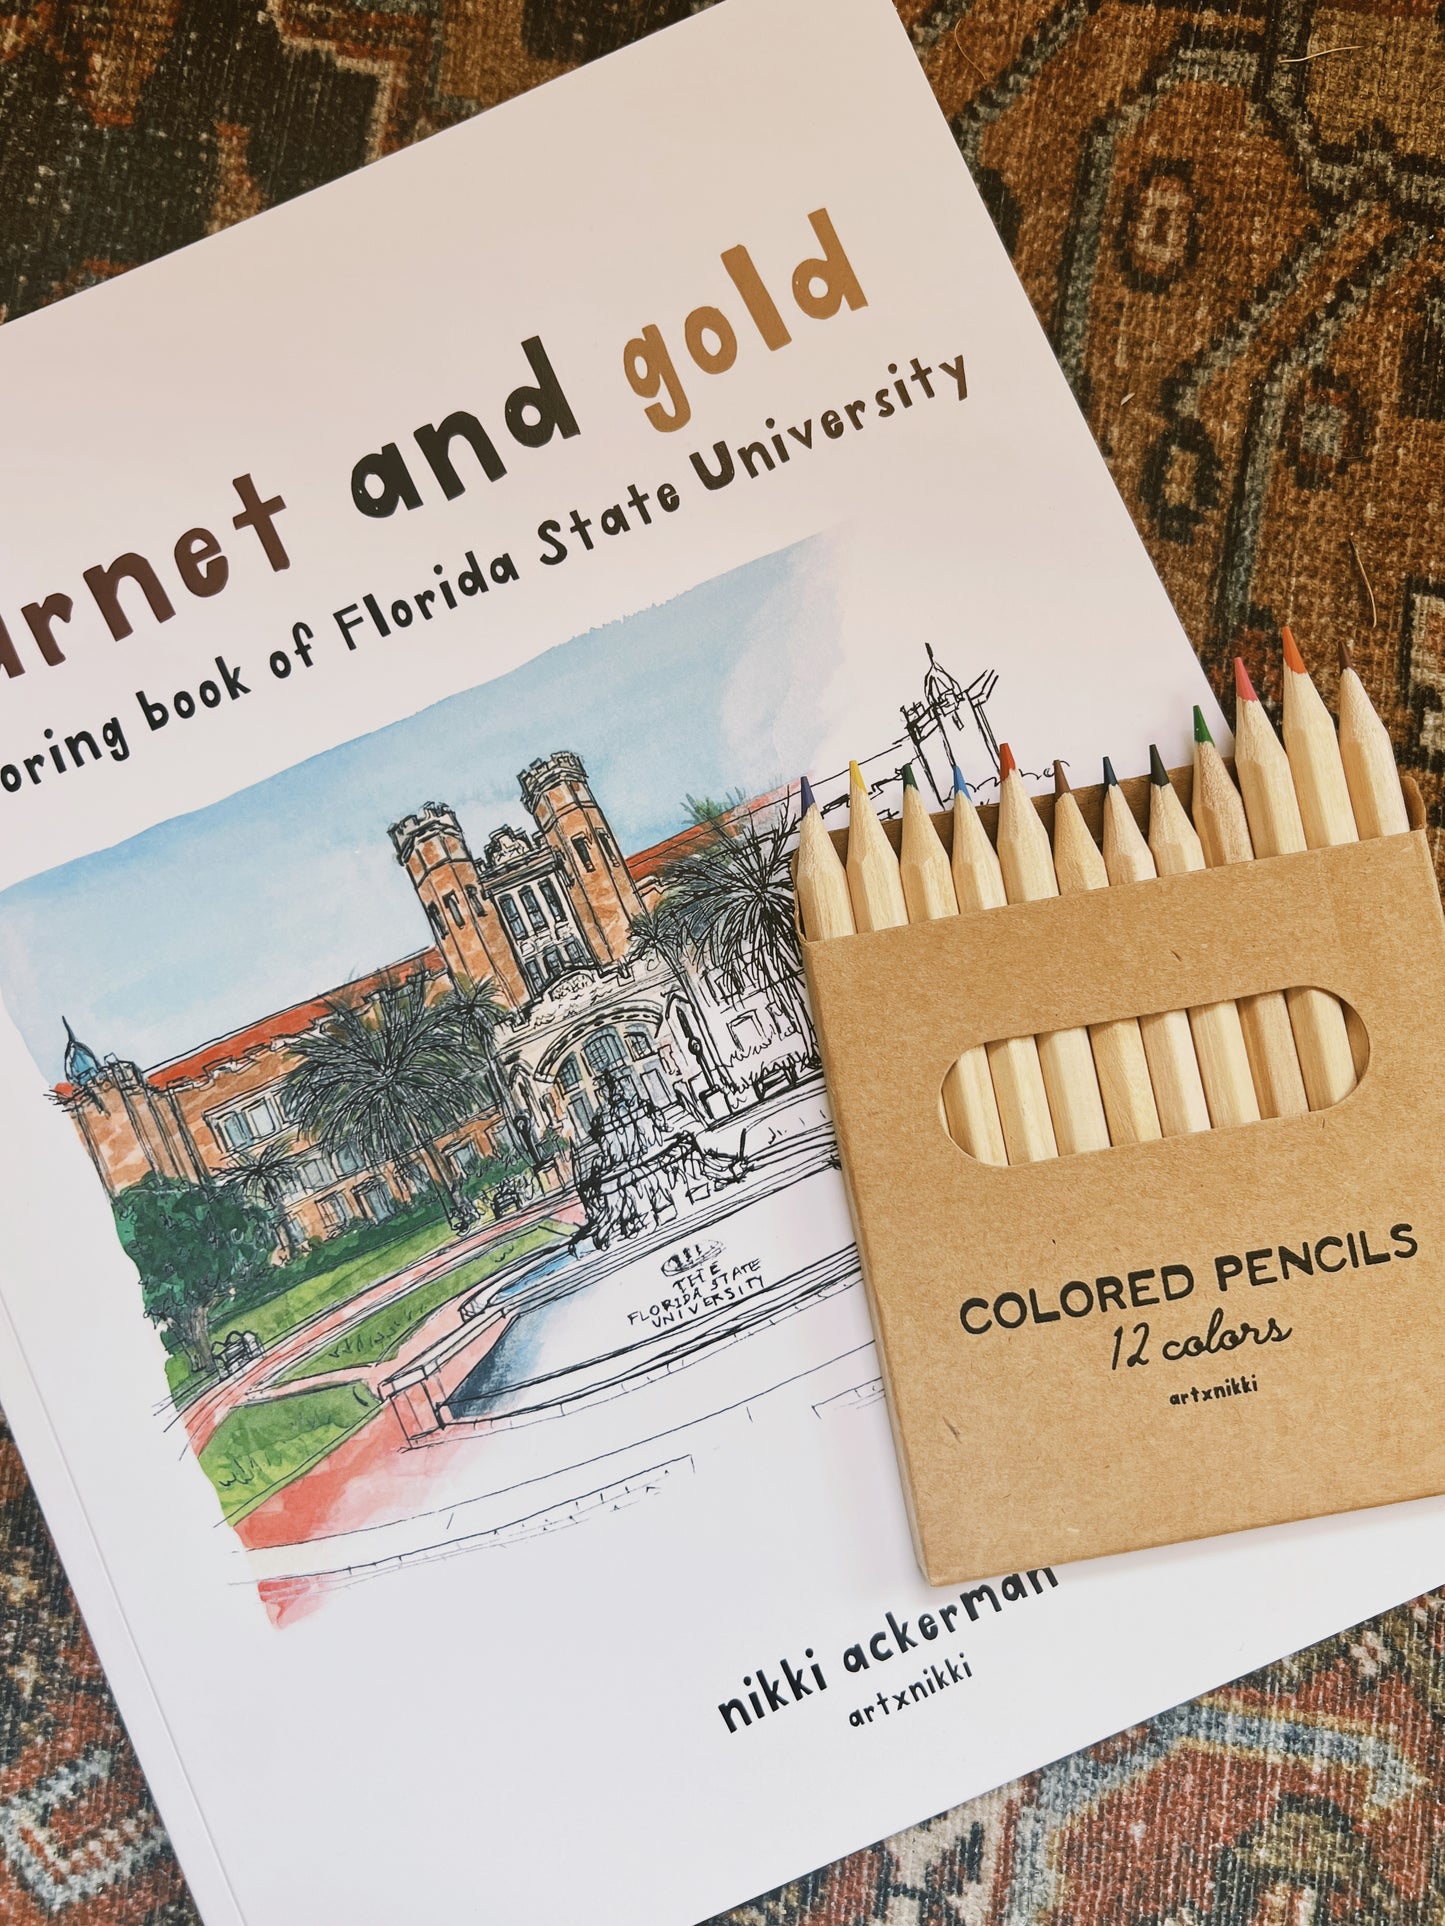 Garnet and Gold: a coloring book of Florida State Univeristy